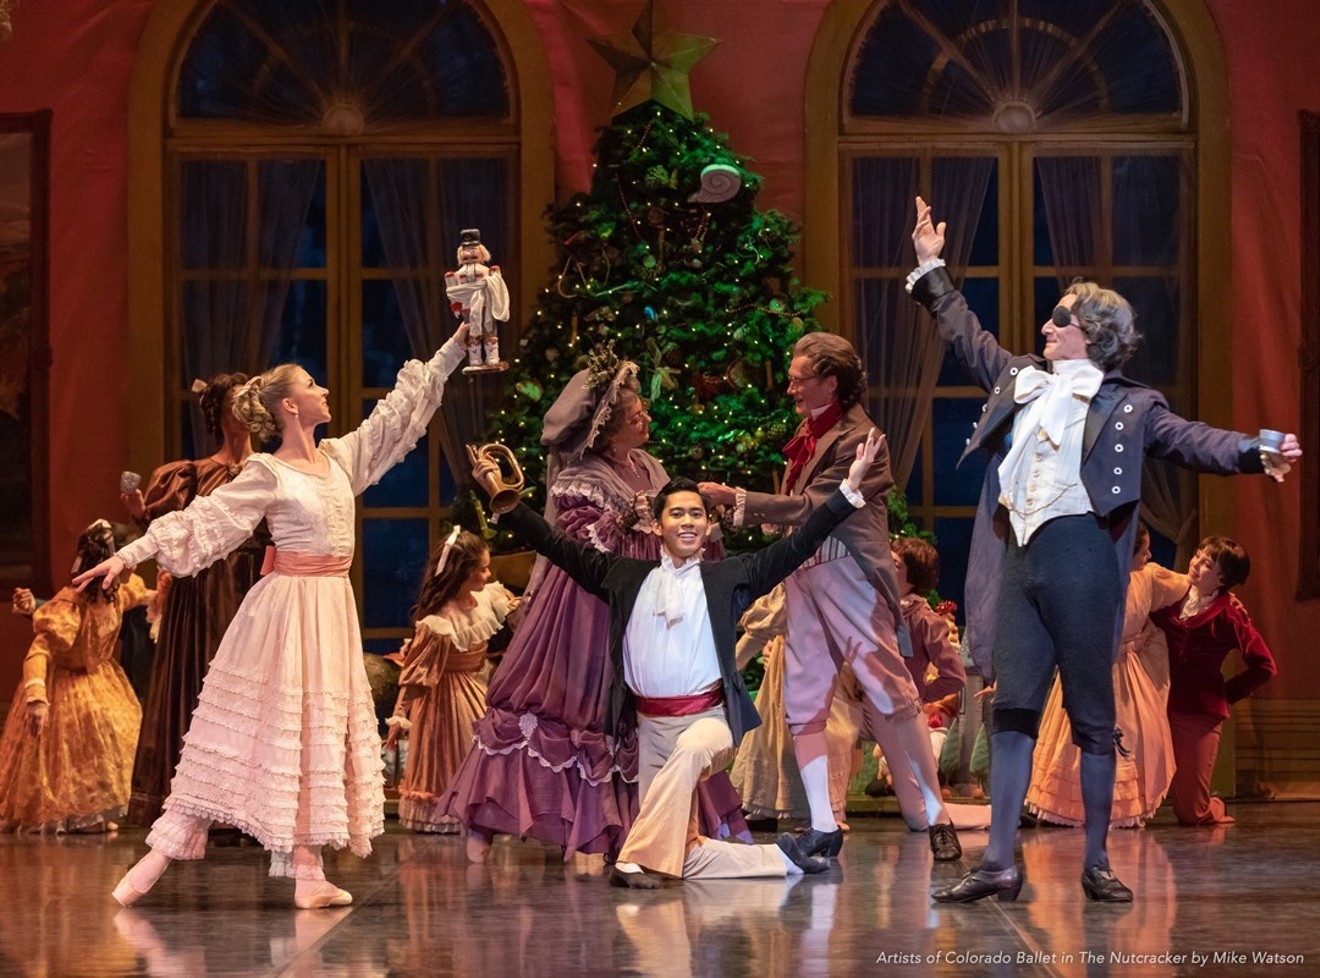 The Colorado Ballet's production of The Nutcracker is an annual tradition.